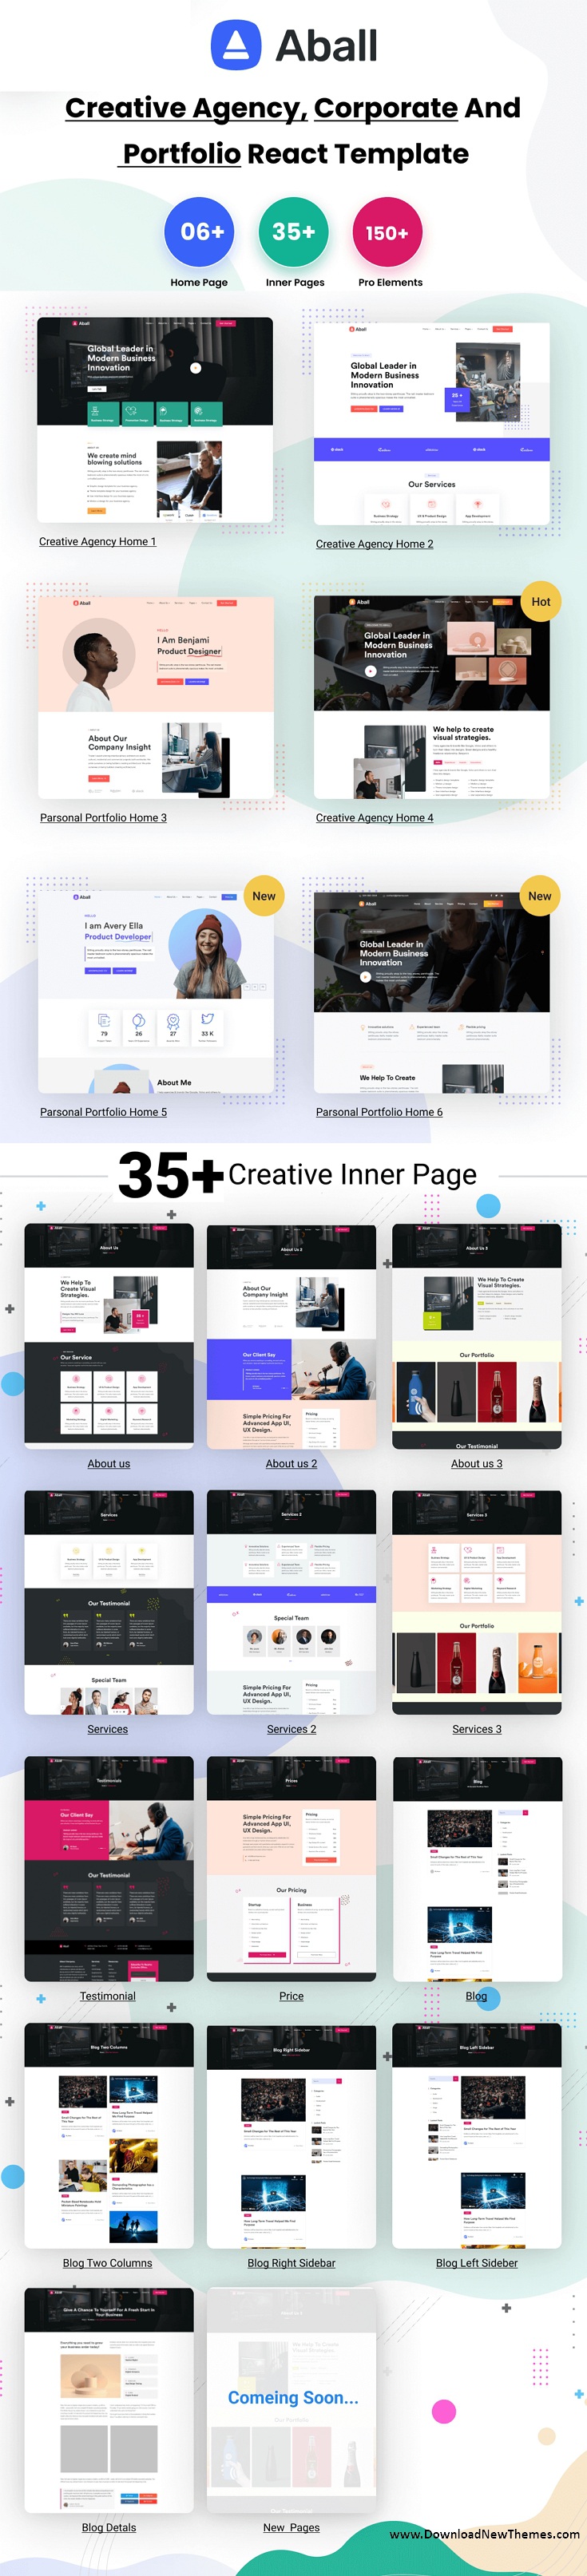 Aball - Creative Agency React Template Review